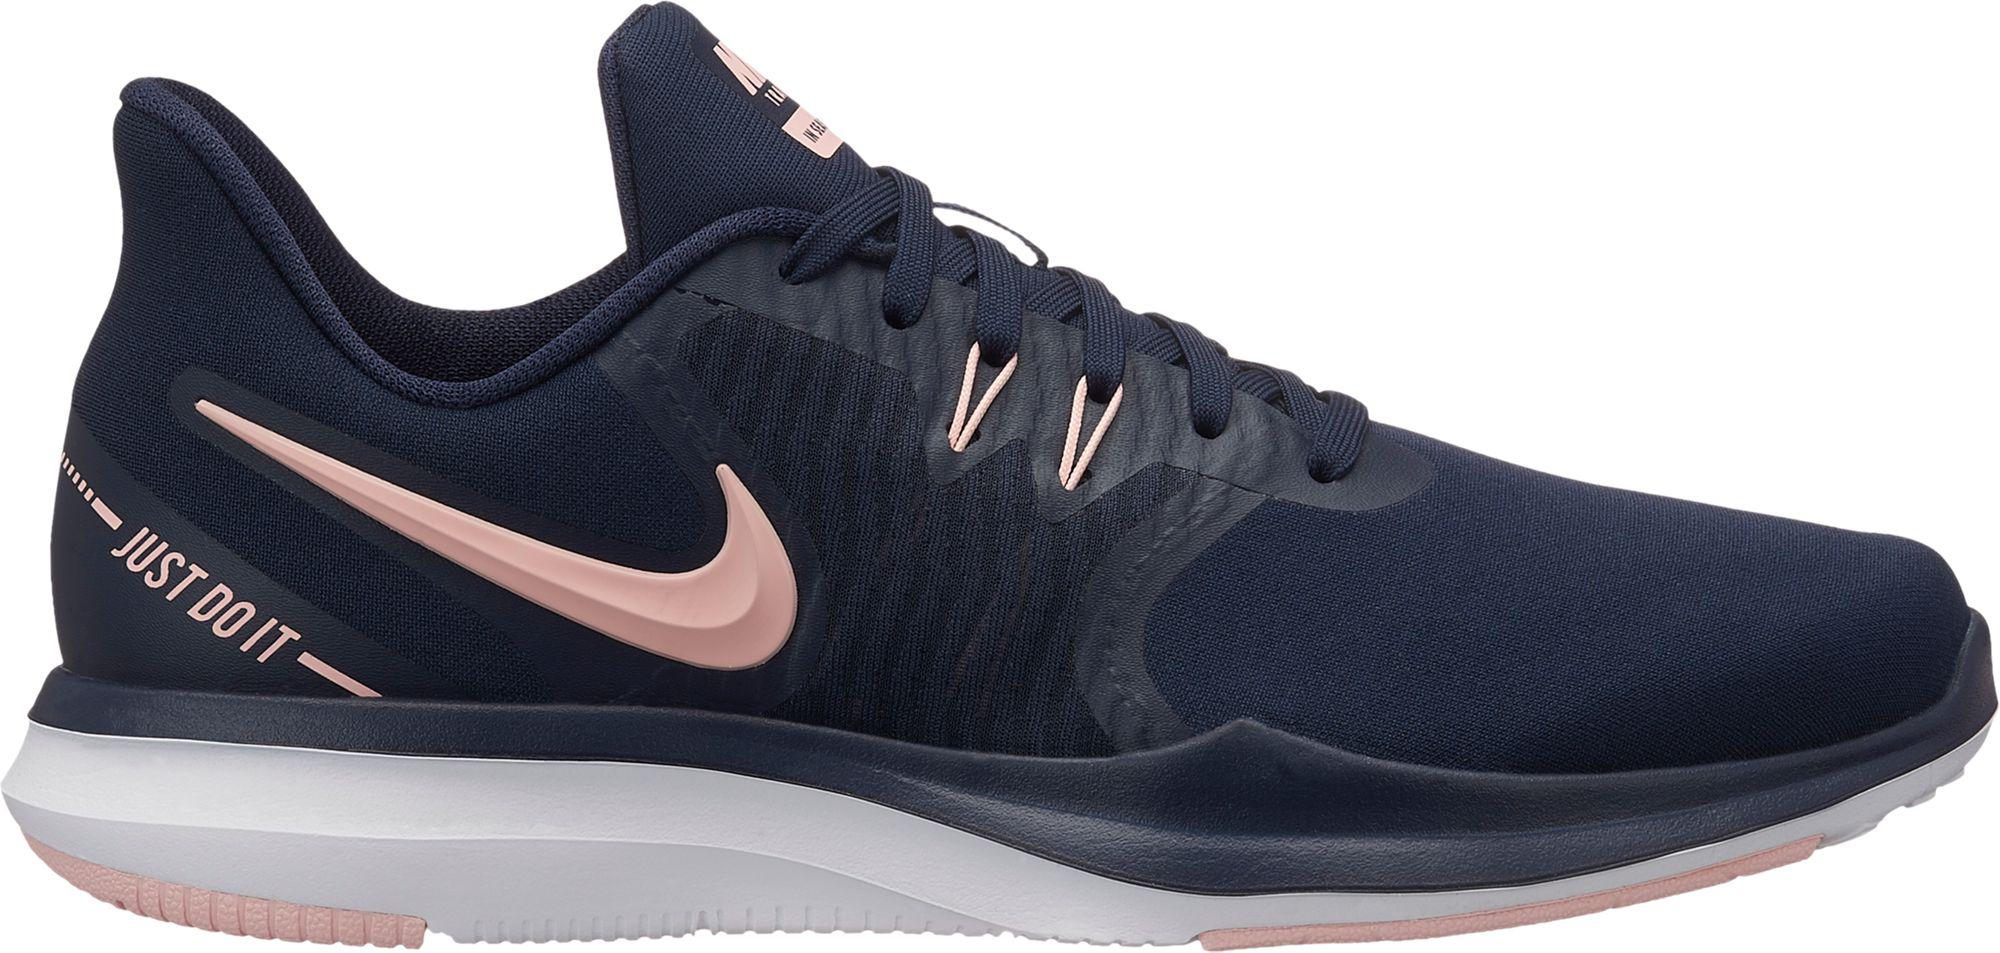 Nike Synthetic In-season Tr 8 Training Shoes in Navy/Pink (Blue) | Lyst